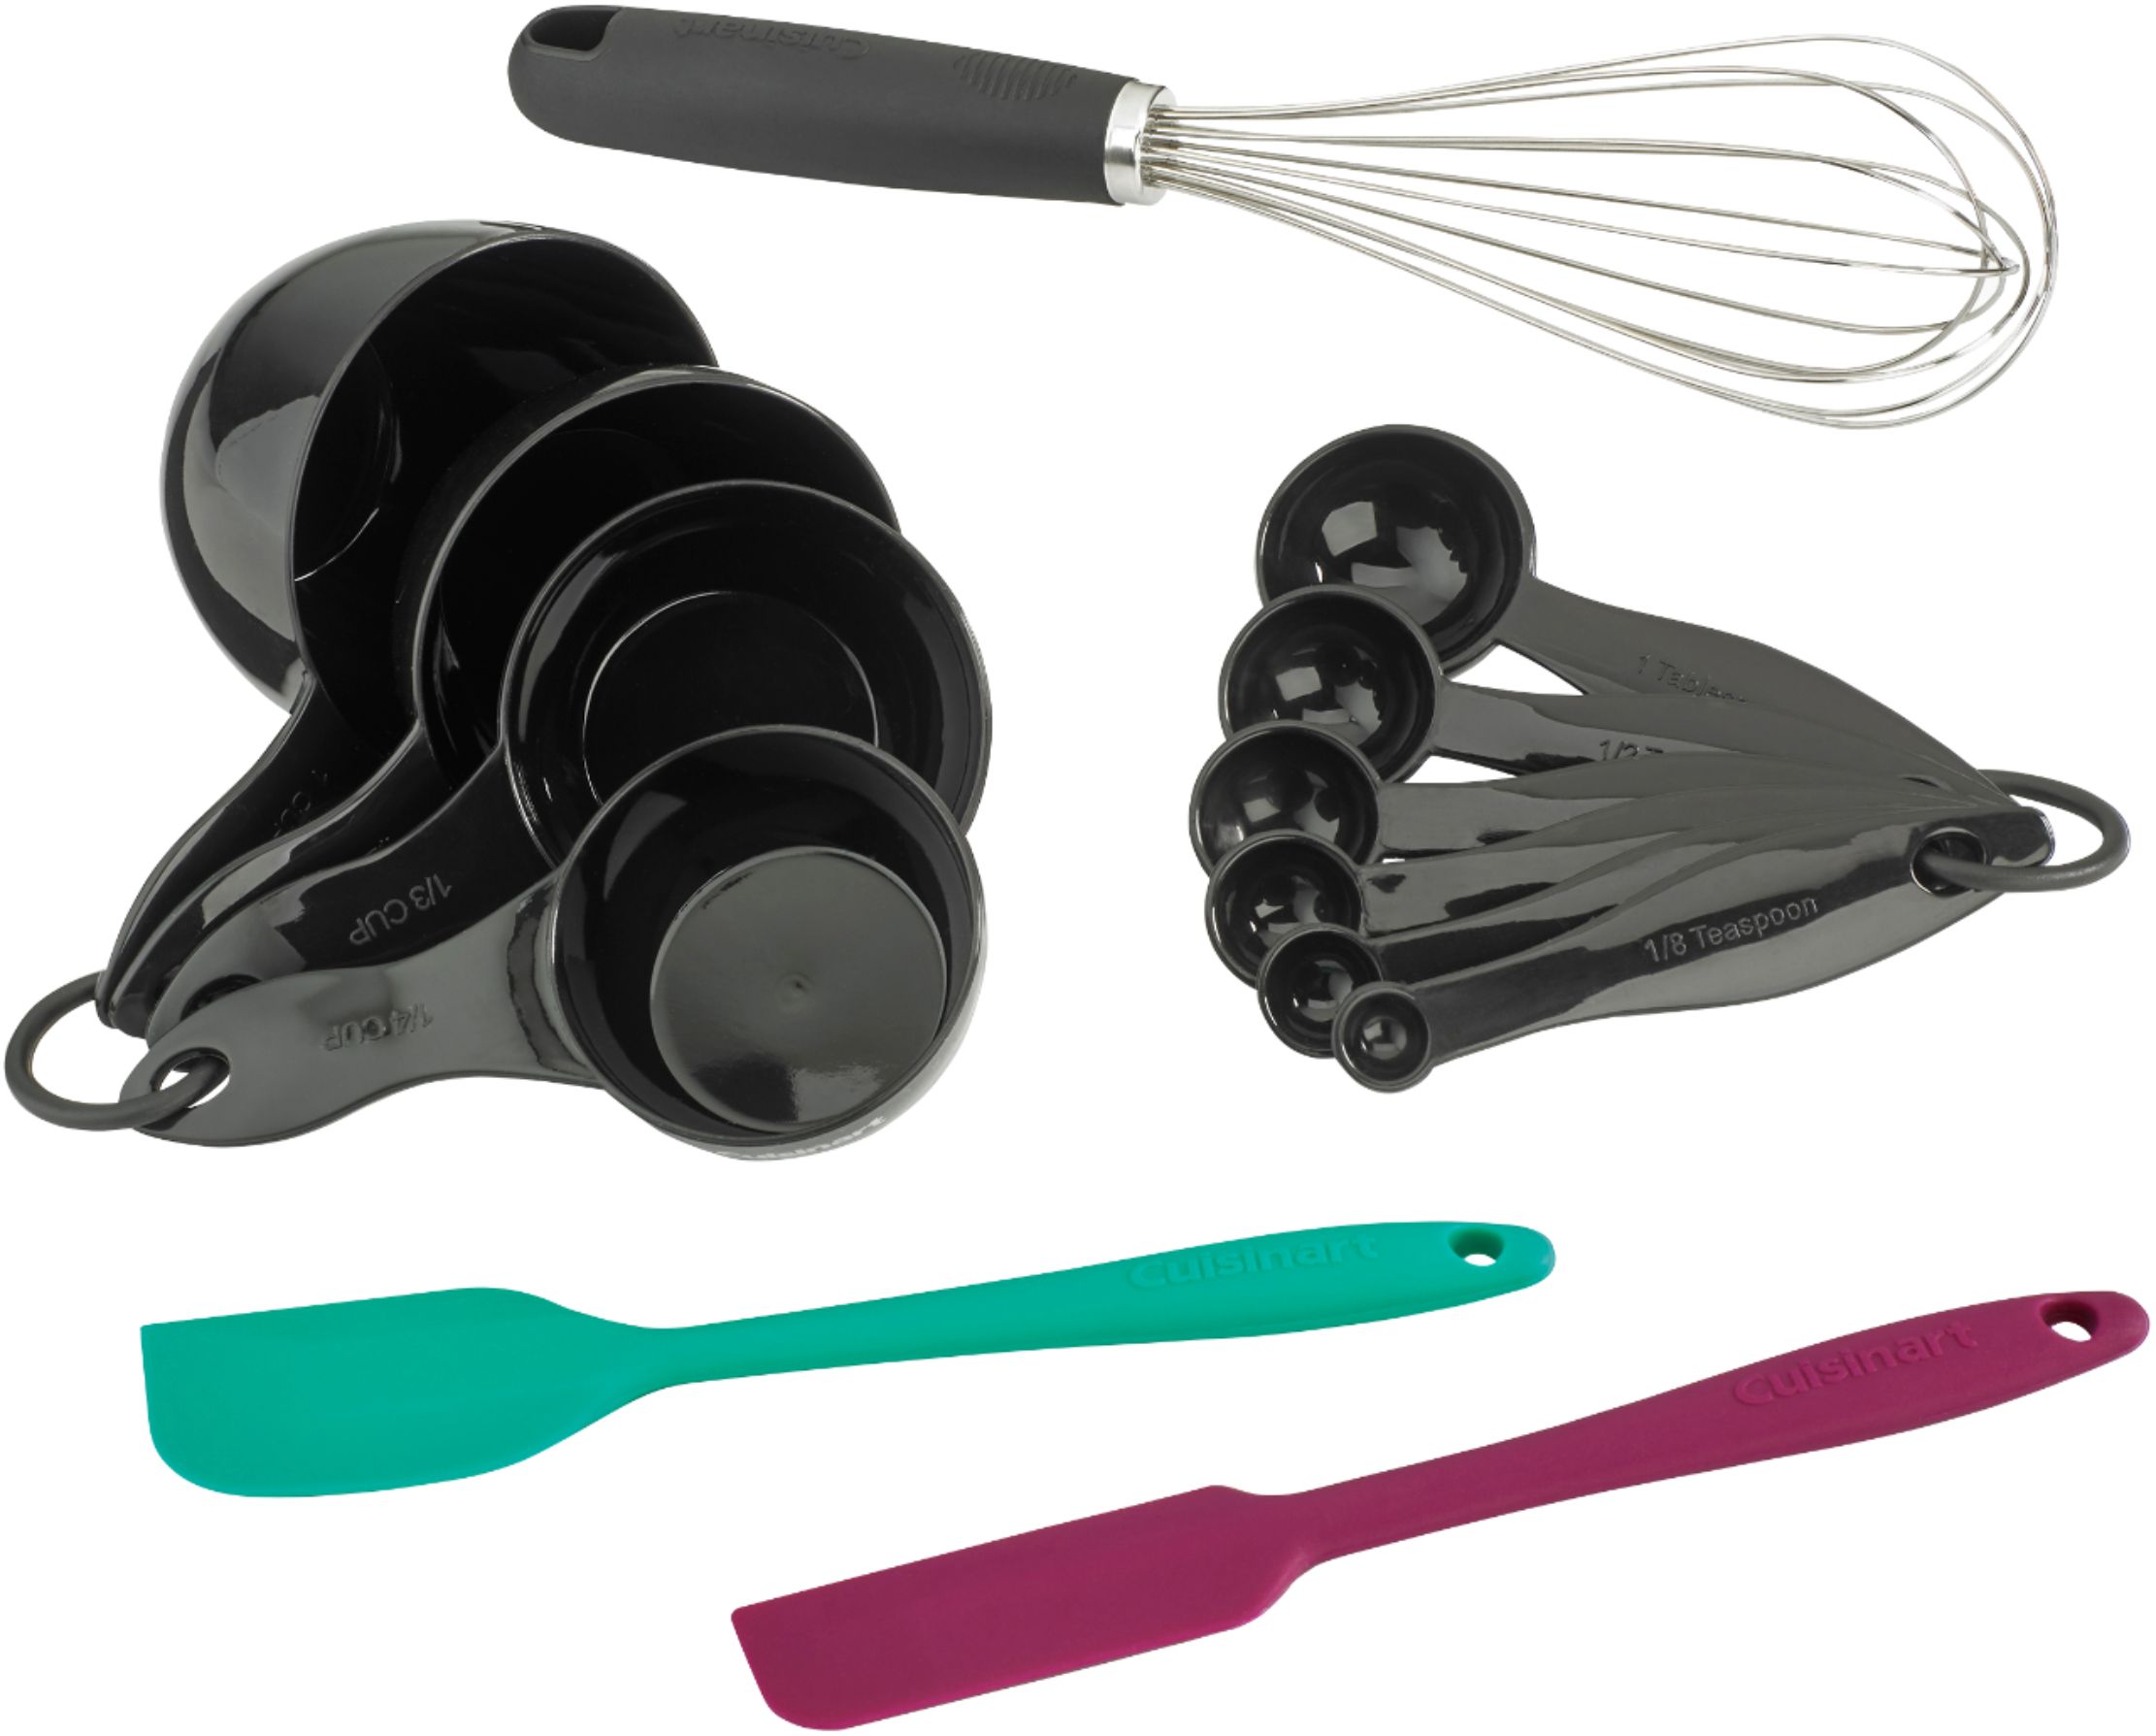  Cuisinart Boxed Tool and Gadget 6- Piece Set. Dishwasher Safe :  Home & Kitchen